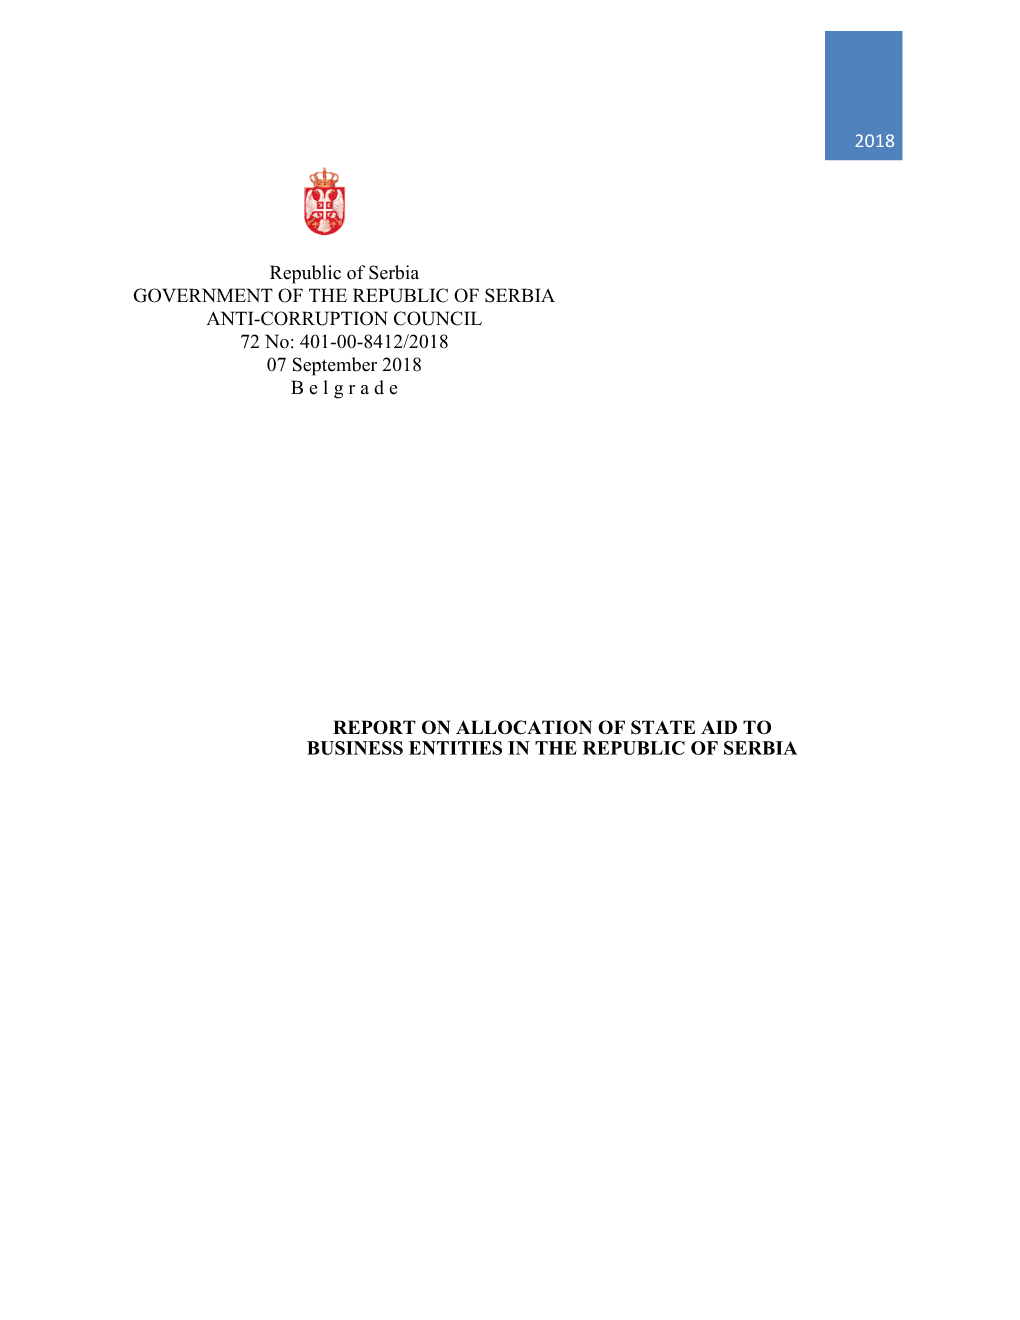 Report on Allocation of State Aid to Business Entities in the Republic of Serbia